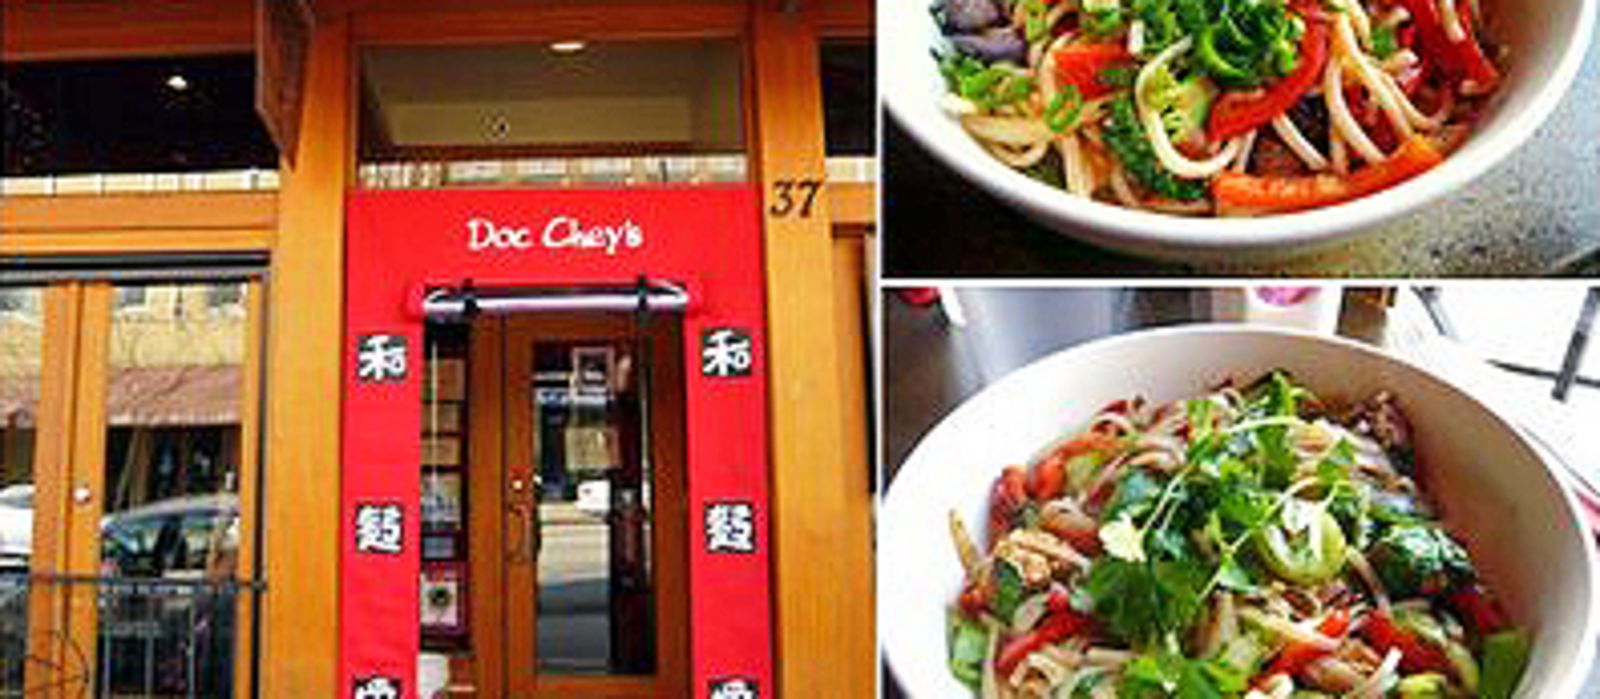 Doc Chey's Noodle House in Asheville, NC